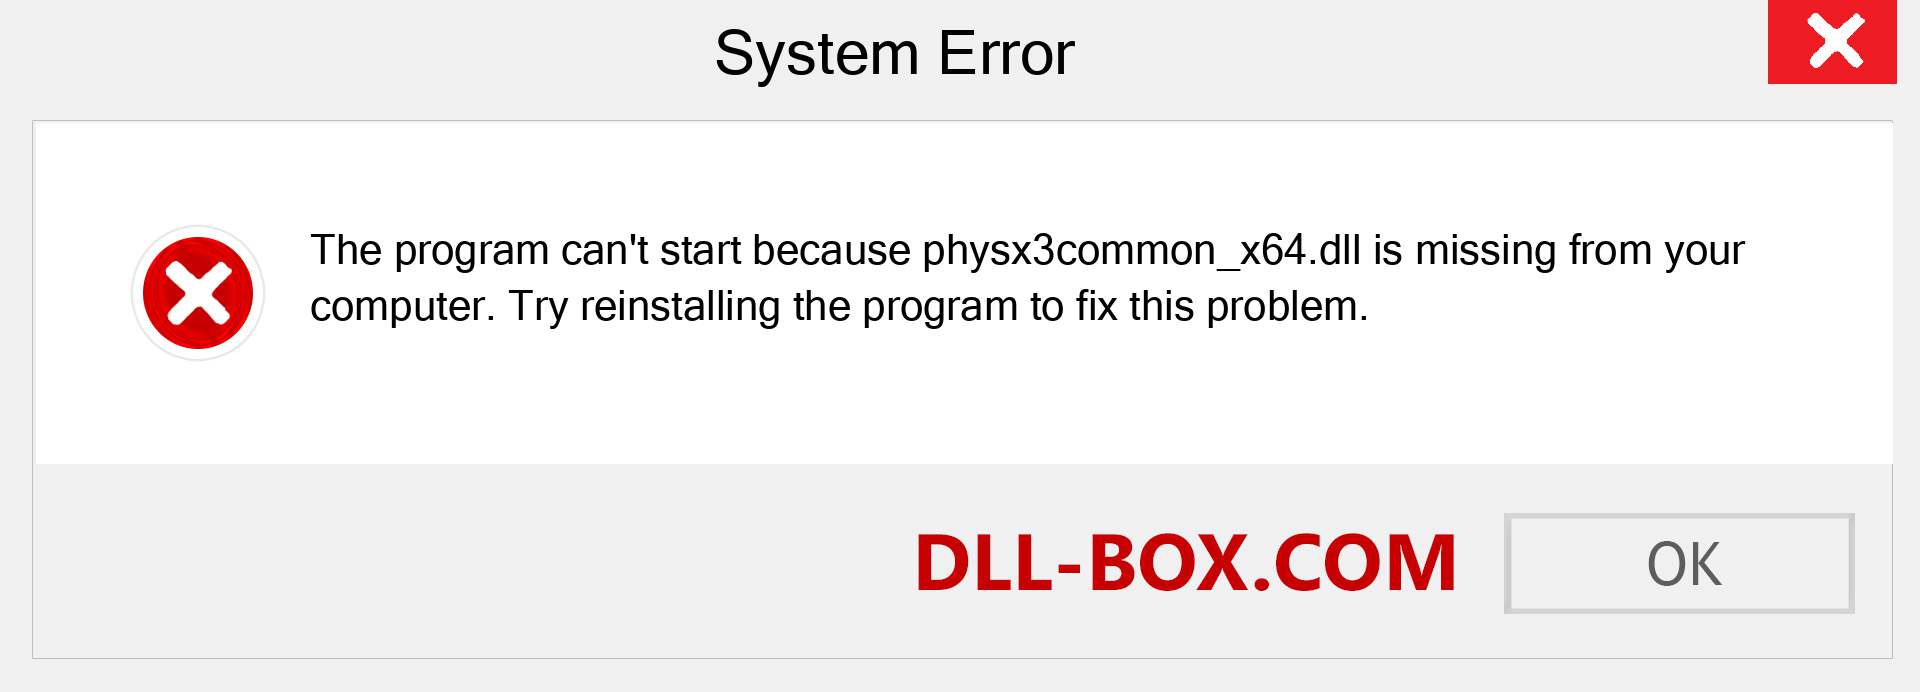  physx3common_x64.dll file is missing?. Download for Windows 7, 8, 10 - Fix  physx3common_x64 dll Missing Error on Windows, photos, images